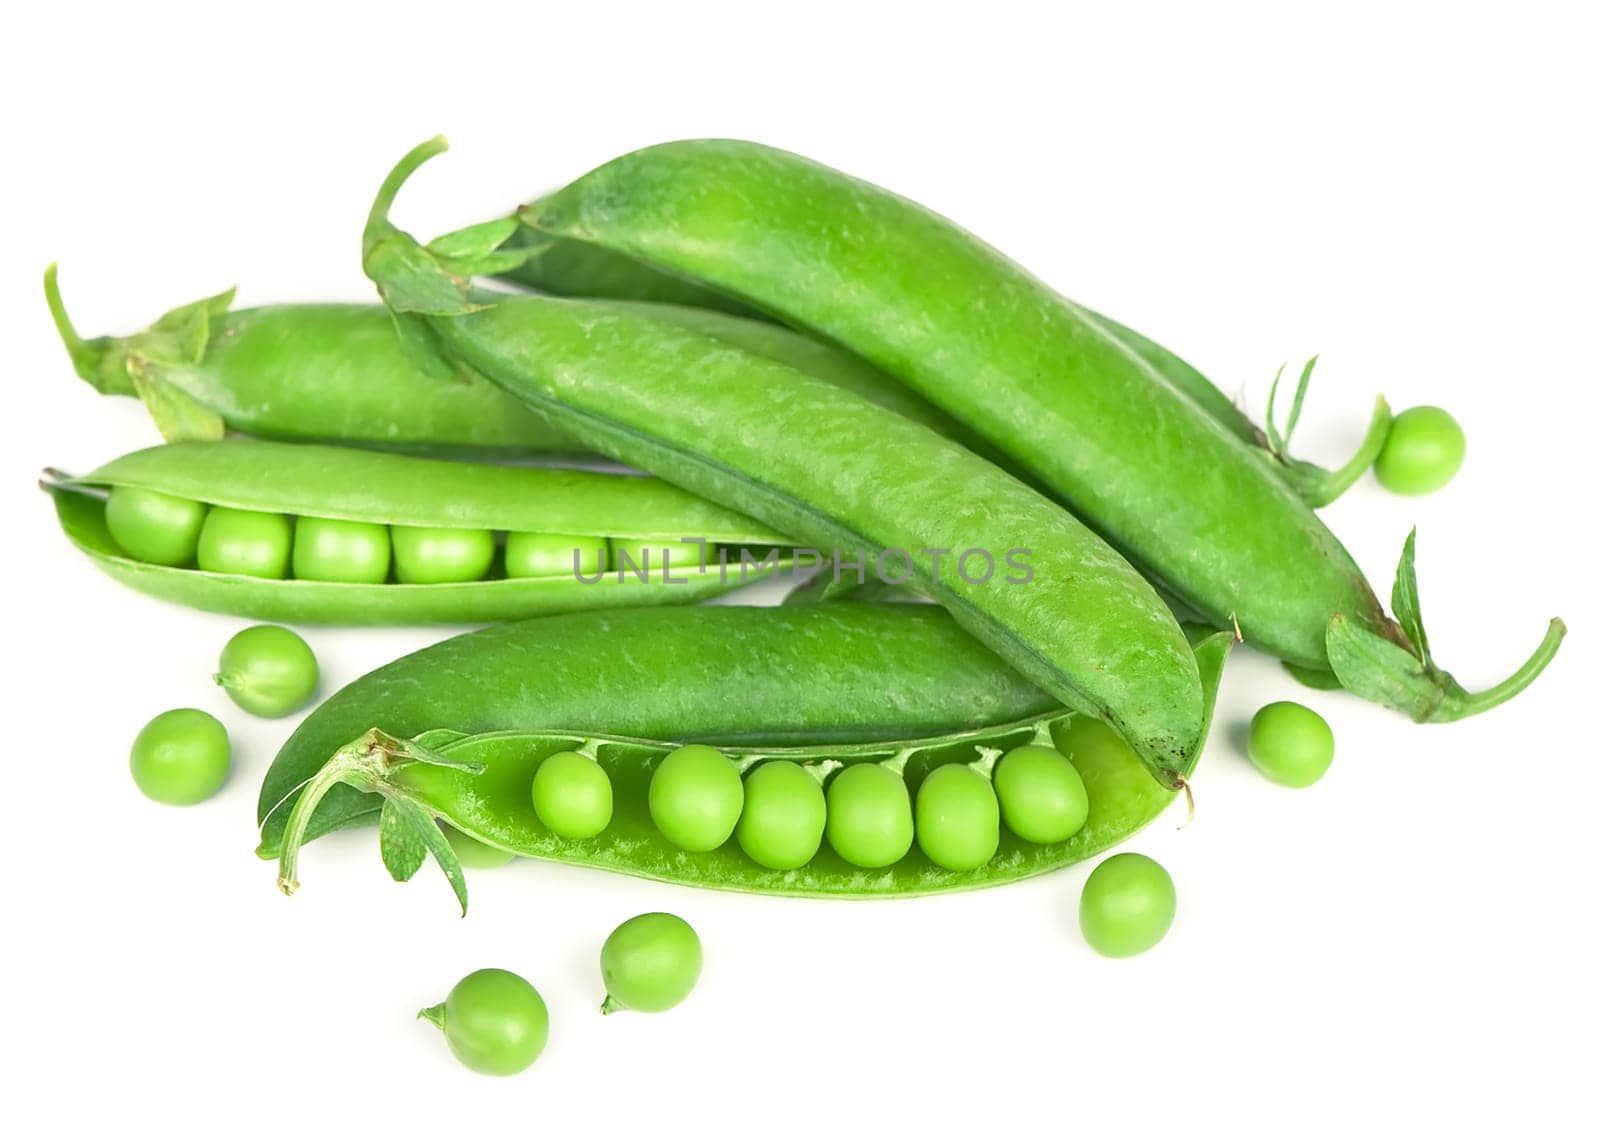 Plump and vibrant green peas, perfectly isolated on a white backdrop, capturing the essence of freshness and wholesome goodness. Raw green peas in pods isolated on the white background by aprilphoto